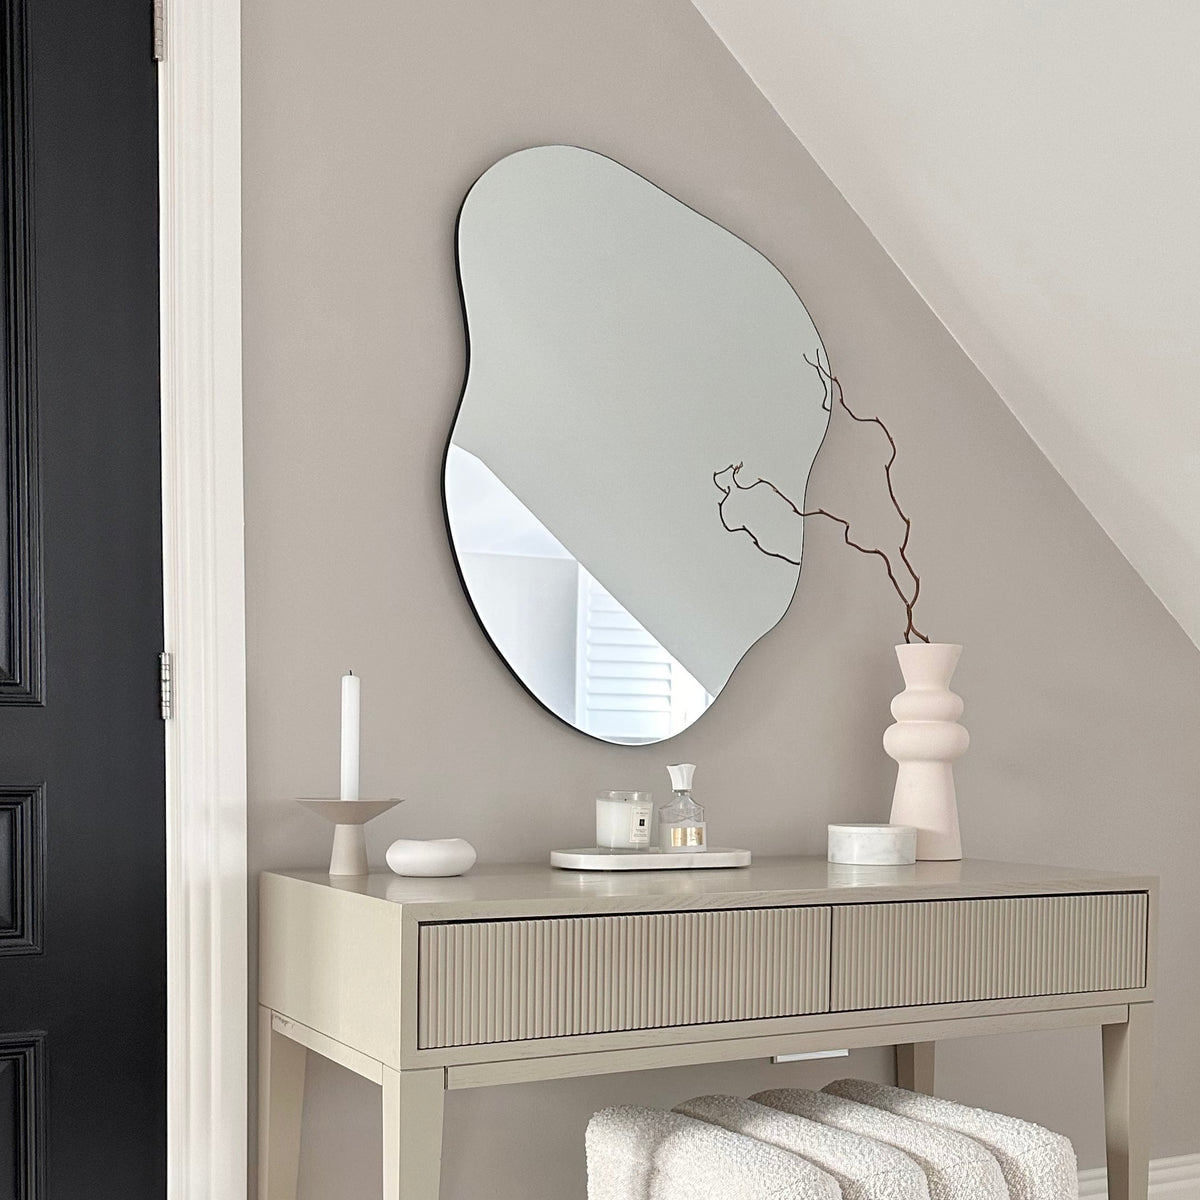 Small Frameless Pond Mirror displayed vertically above console table